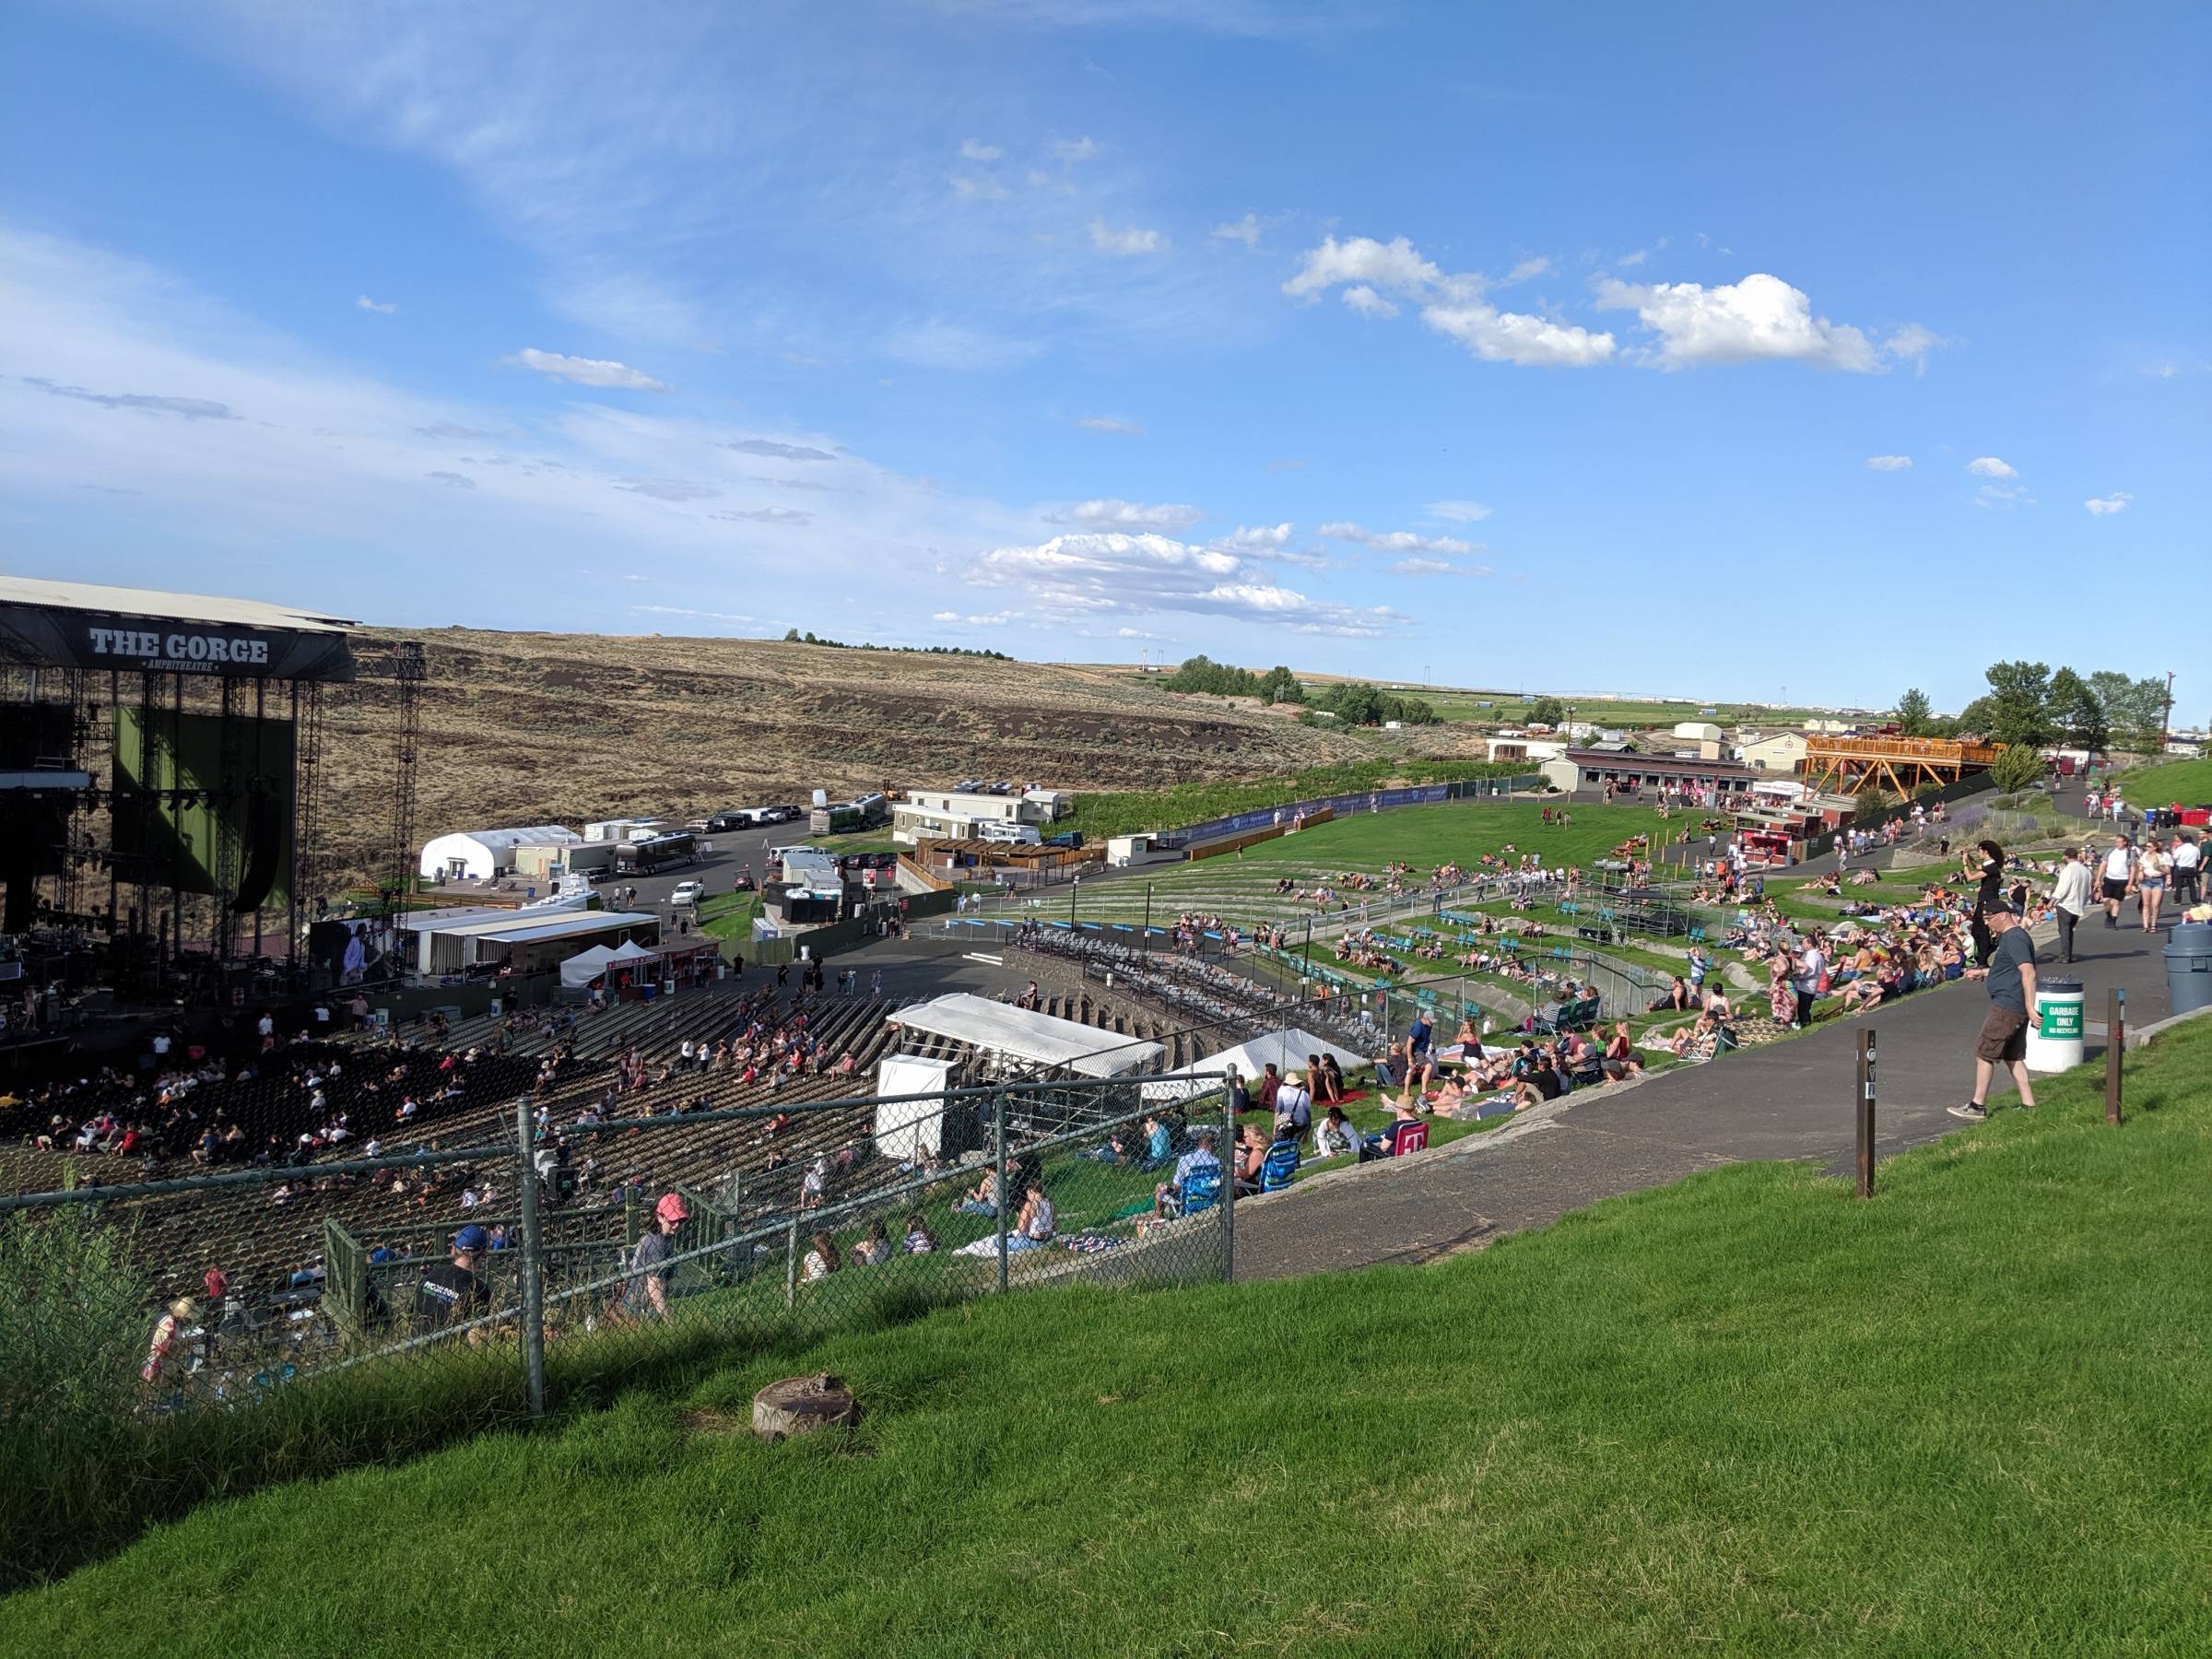 Levels at The Gorge